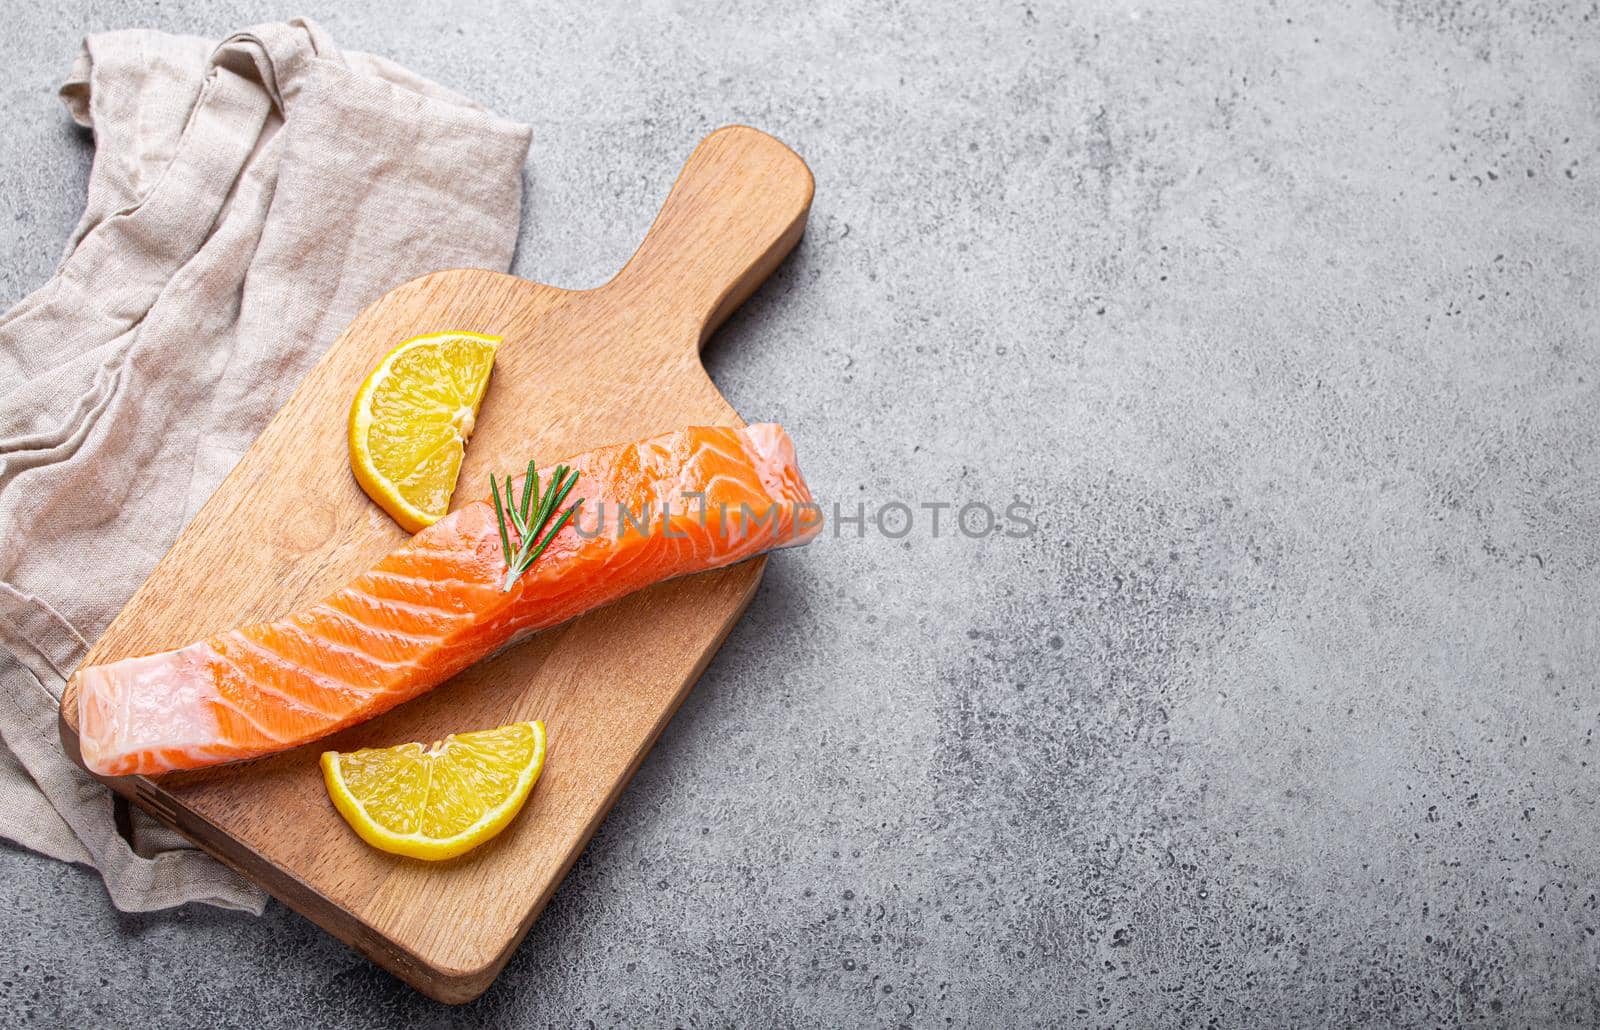 Raw salmon fish fillet with lemon wedges and rosemary on wooden cutting board by its_al_dente